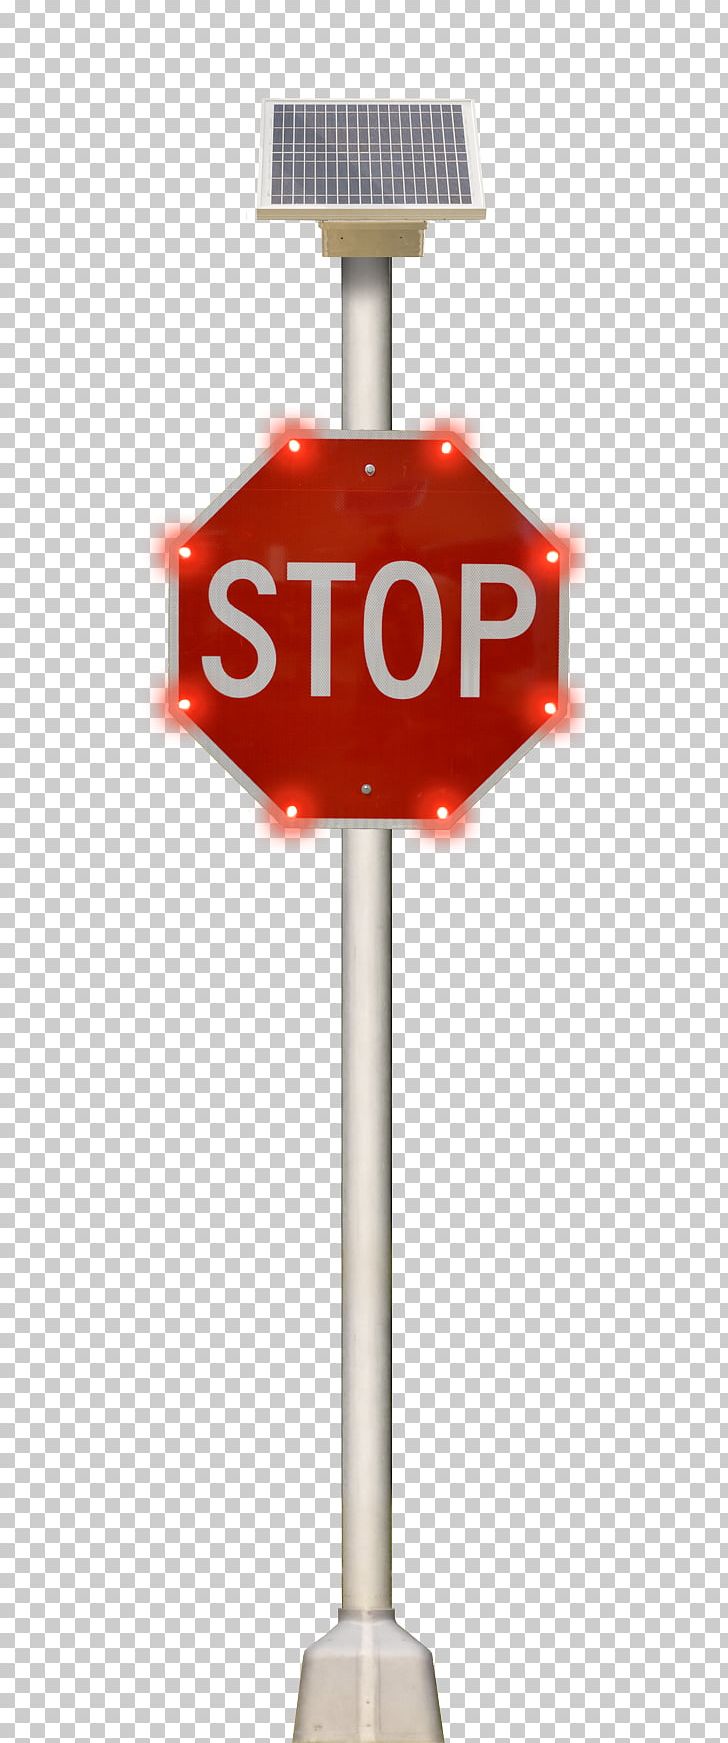 Stop Sign Road Warning Sign Pedestrian Crossing Beacon PNG, Clipart, Alert, Beacon, Information, Pedestrian Crossing, Pole Free PNG Download